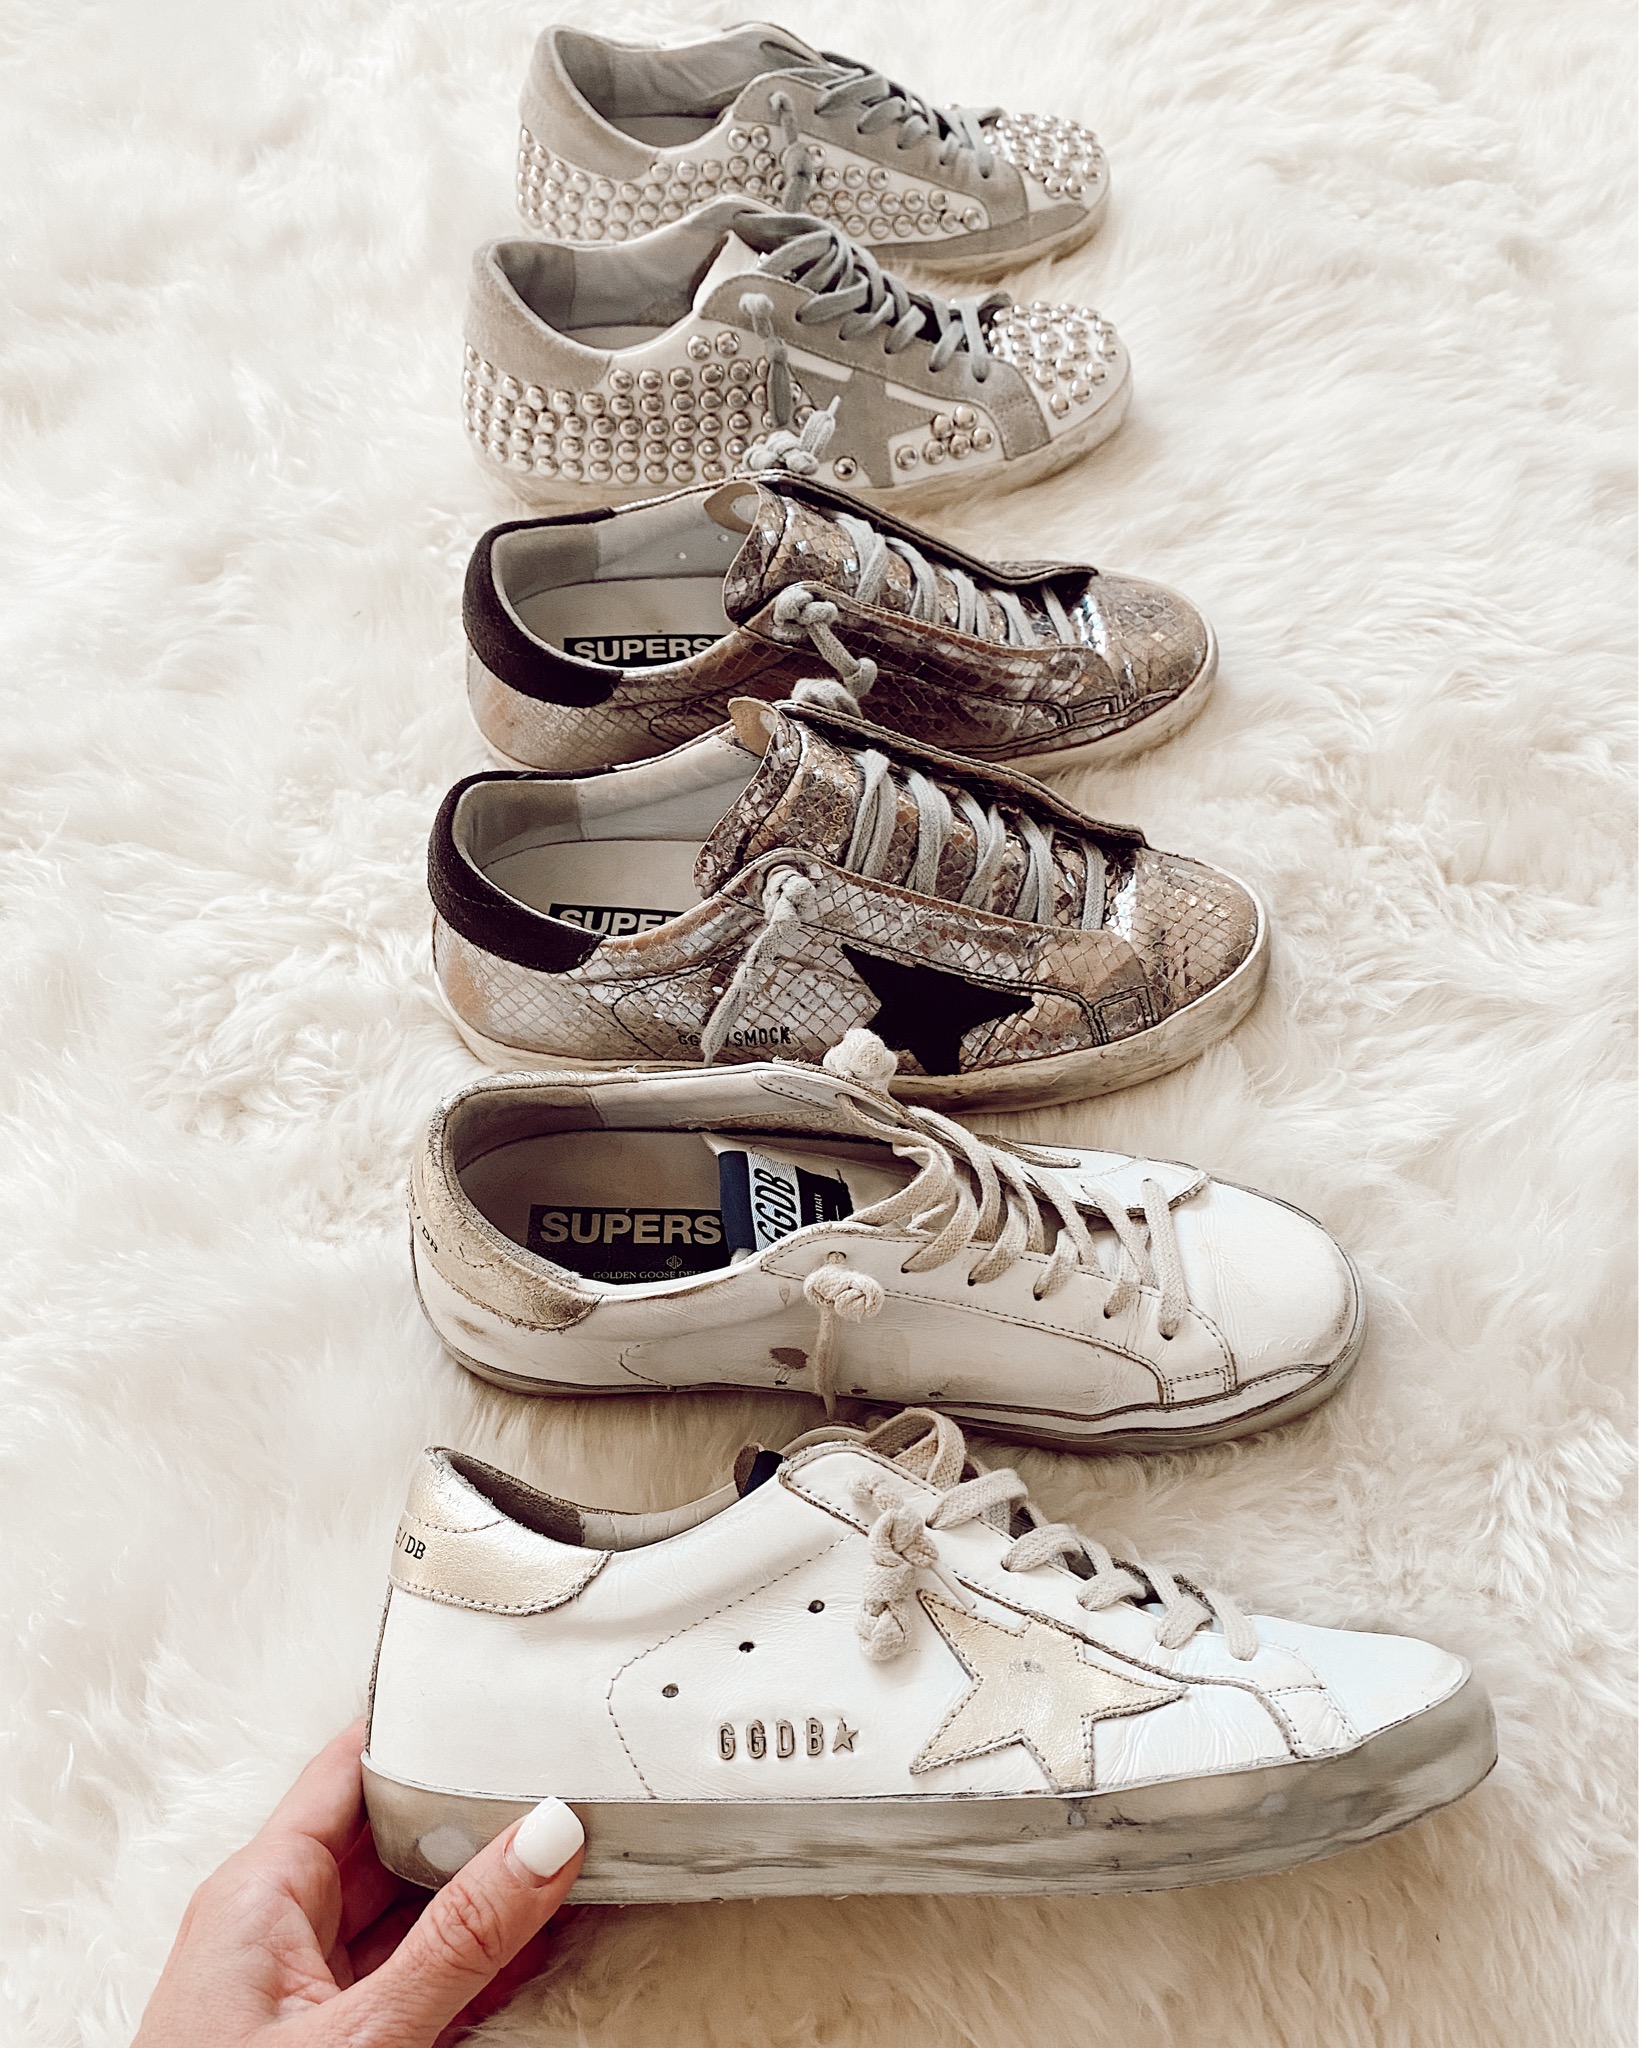 jaime shrayber reviews golden goose sneakers and sizing